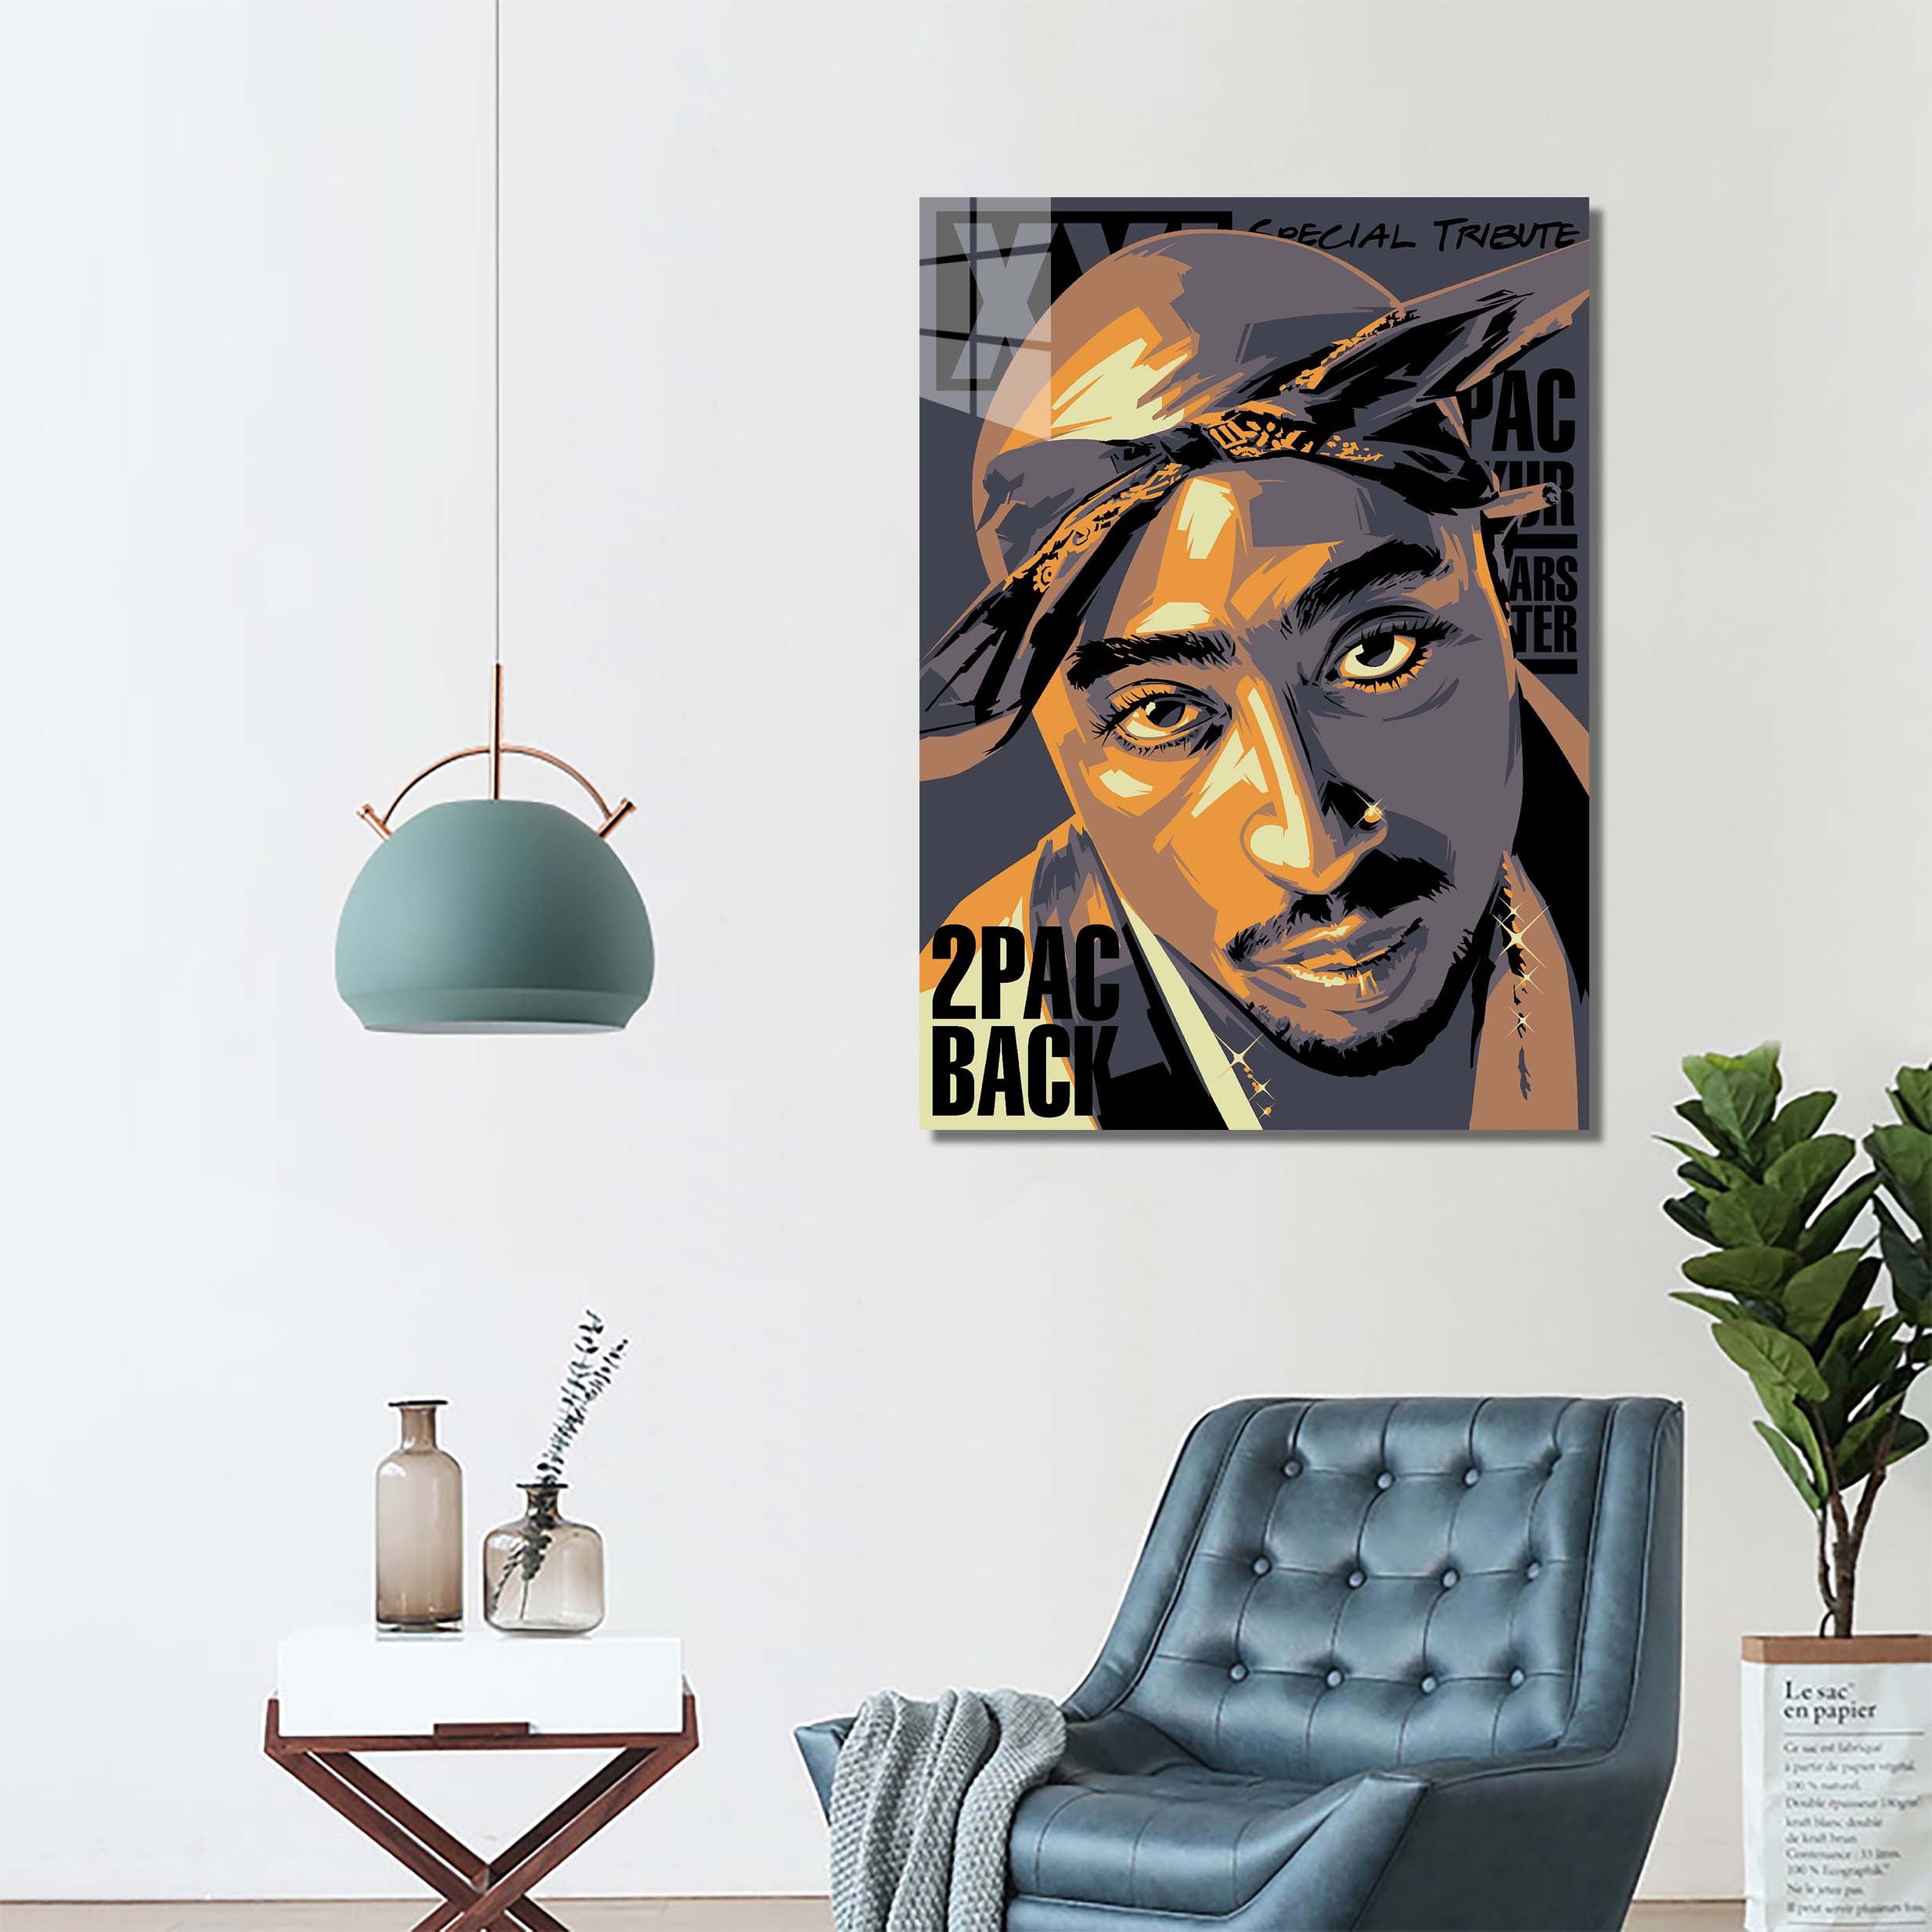 2Pac-designed by @My Kido Art